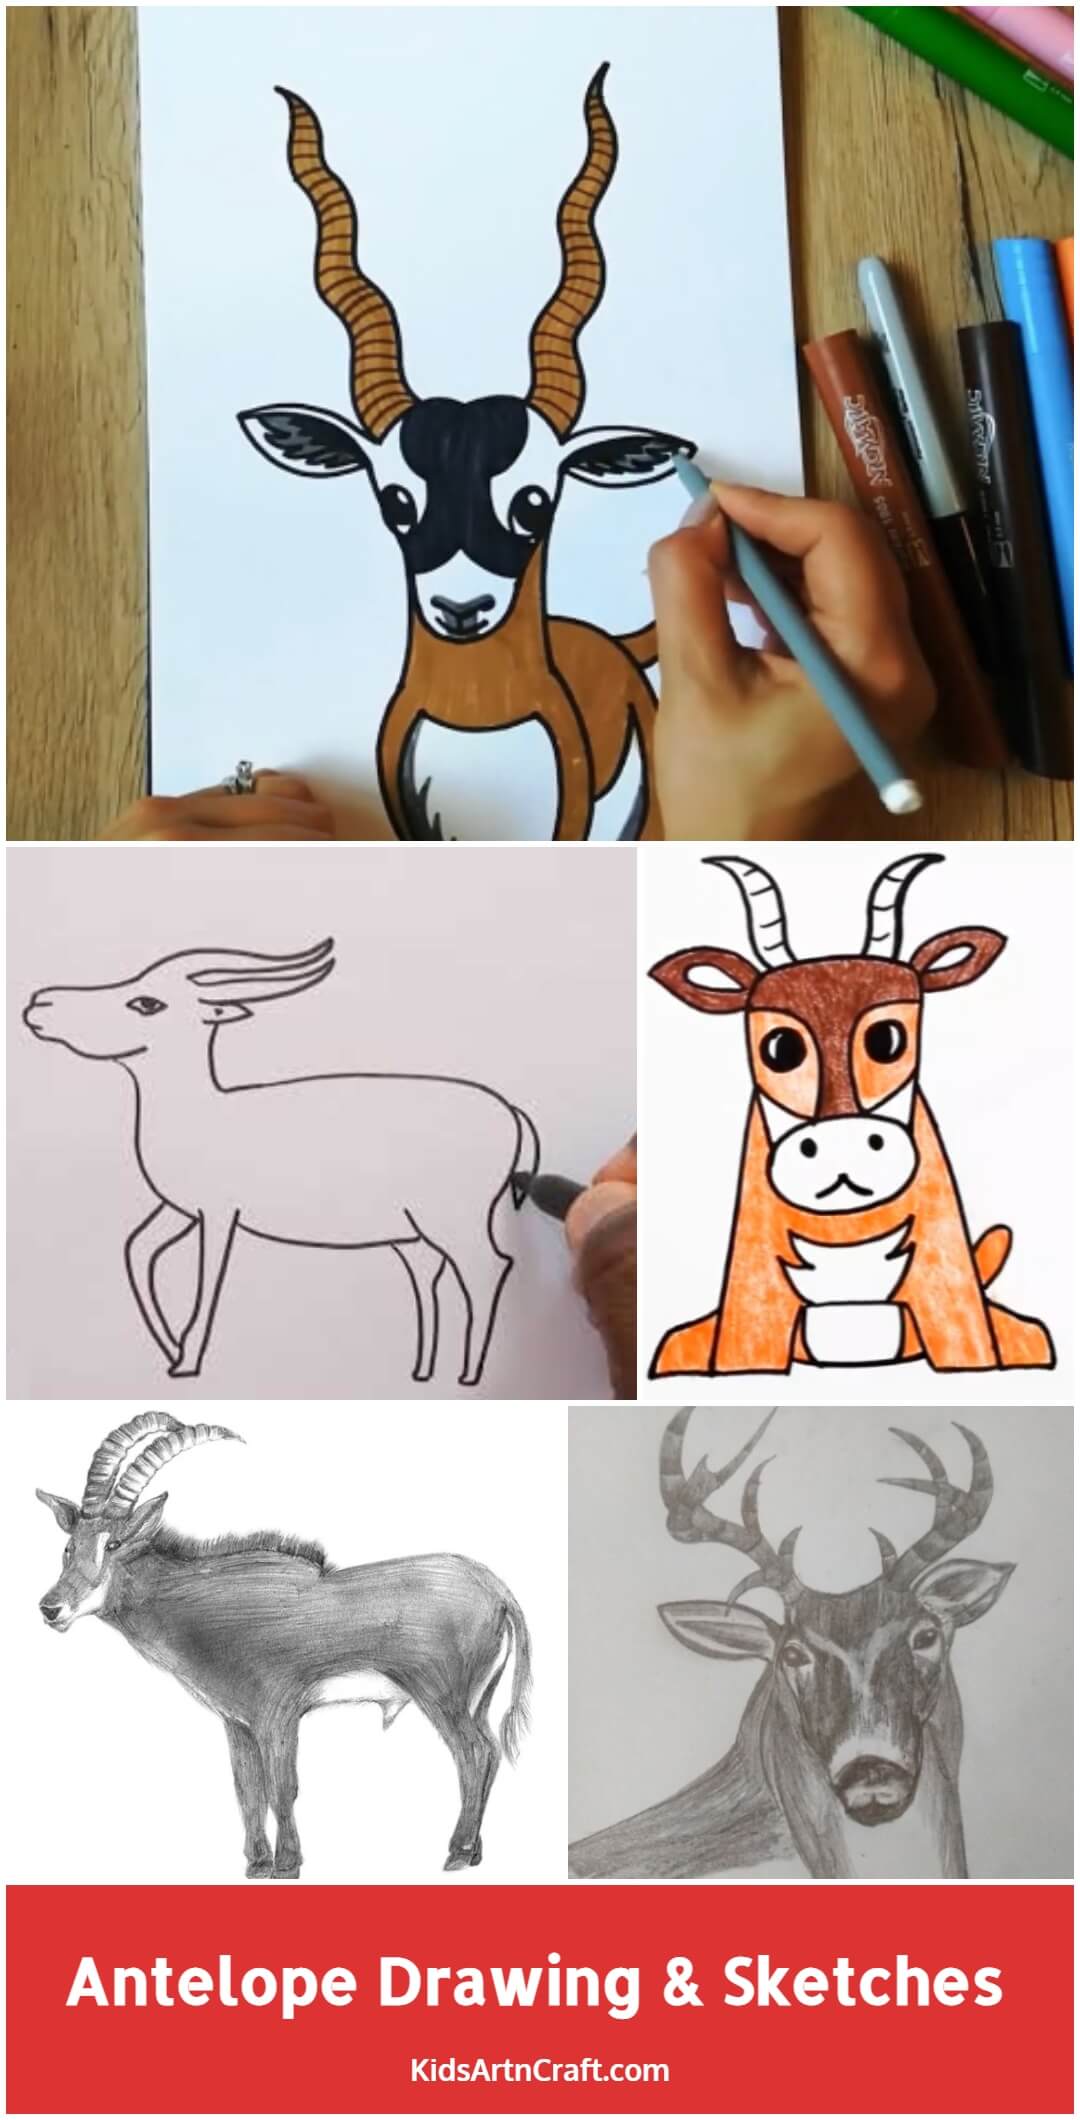 Antelope Drawing & Sketches  For Kids